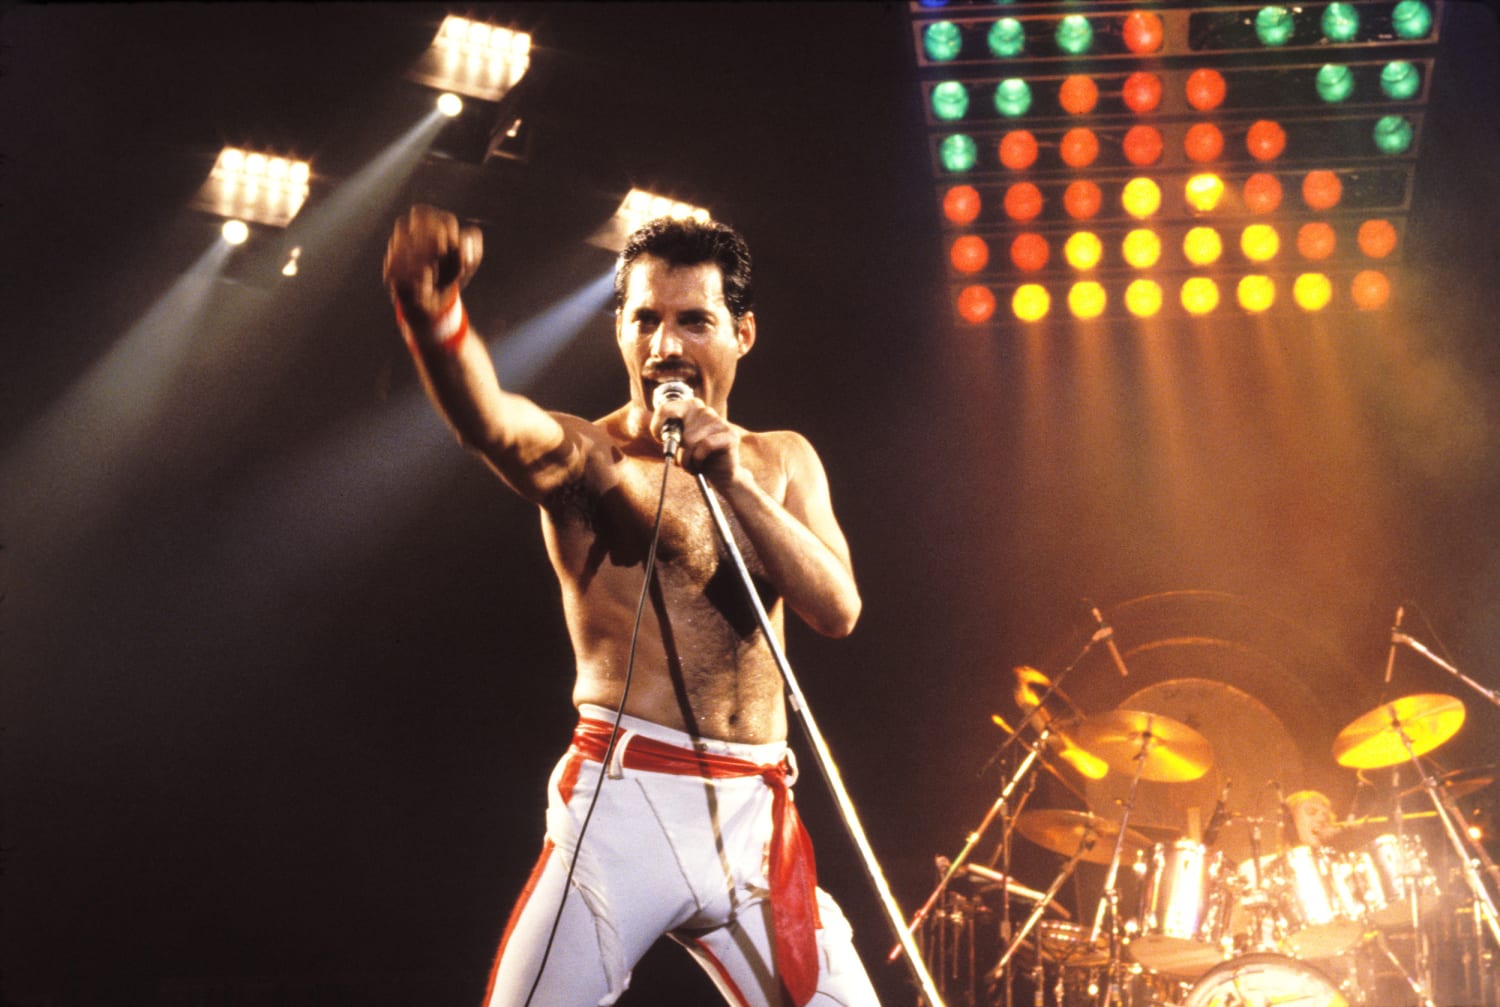 With roots in Asia and Africa, Freddie Mercury left a legacy influenced by  his background